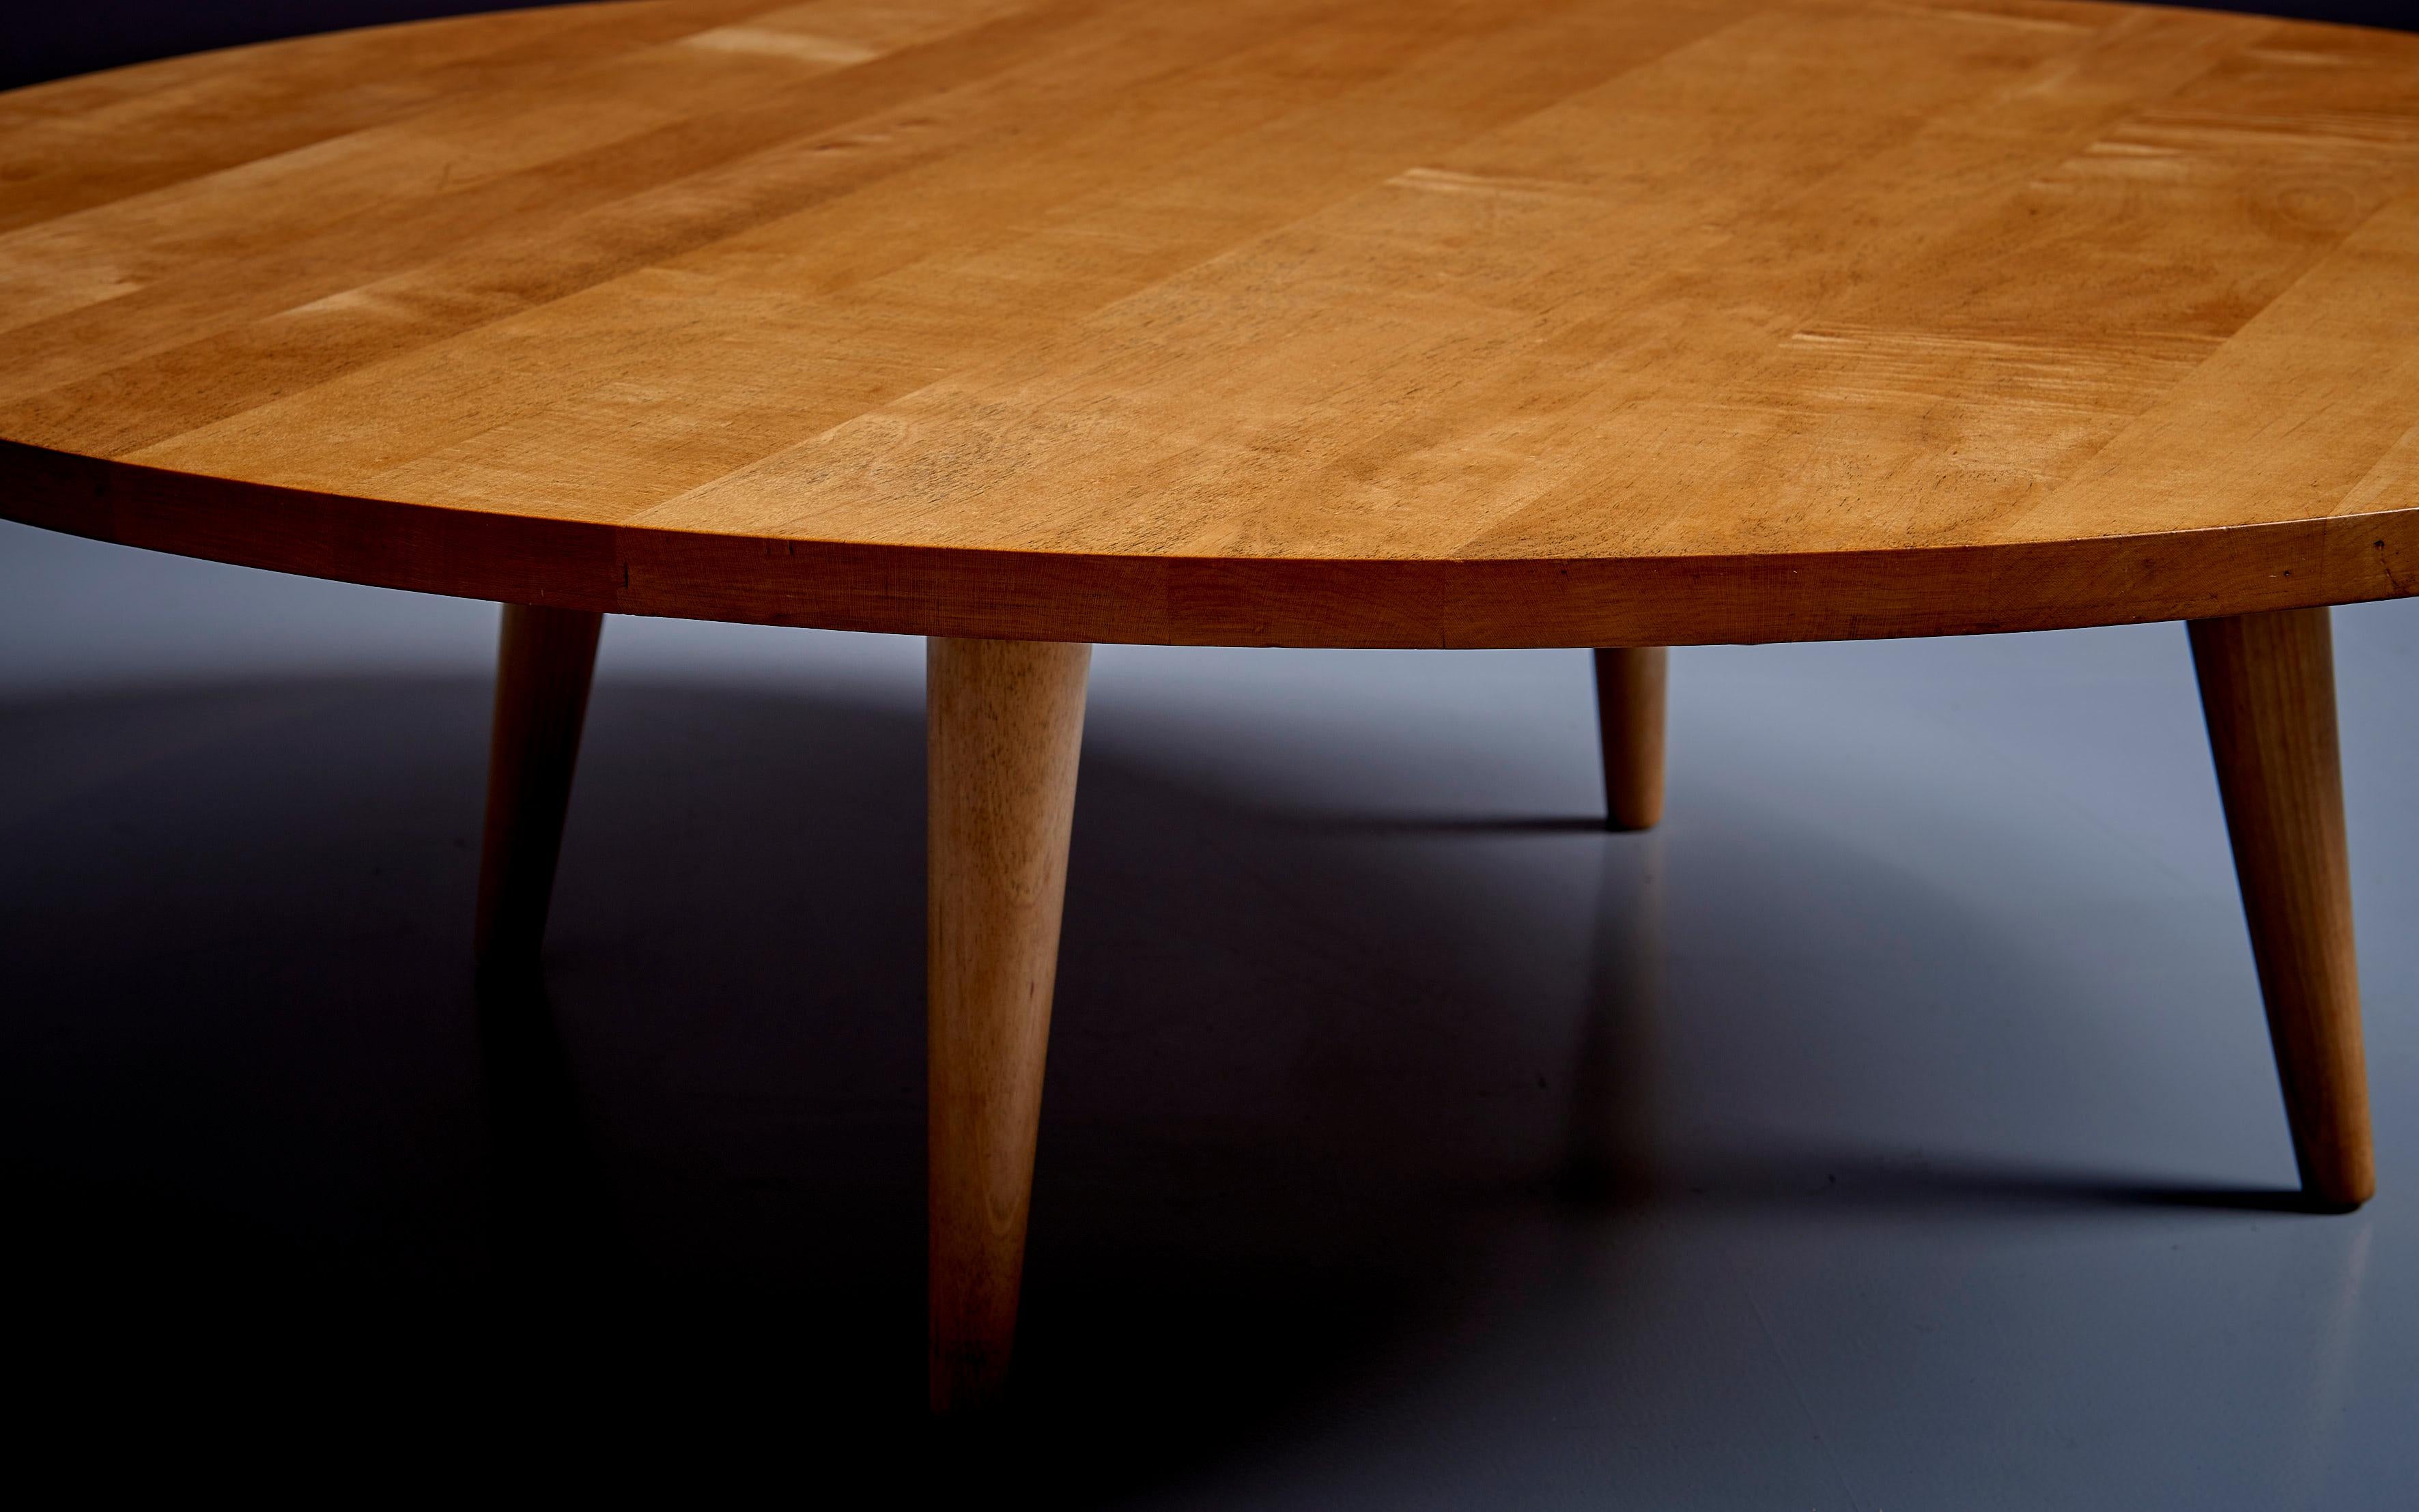 A rare low round Planner Group coffee table by Paul McCobb, in excellent condition in clear maple.

